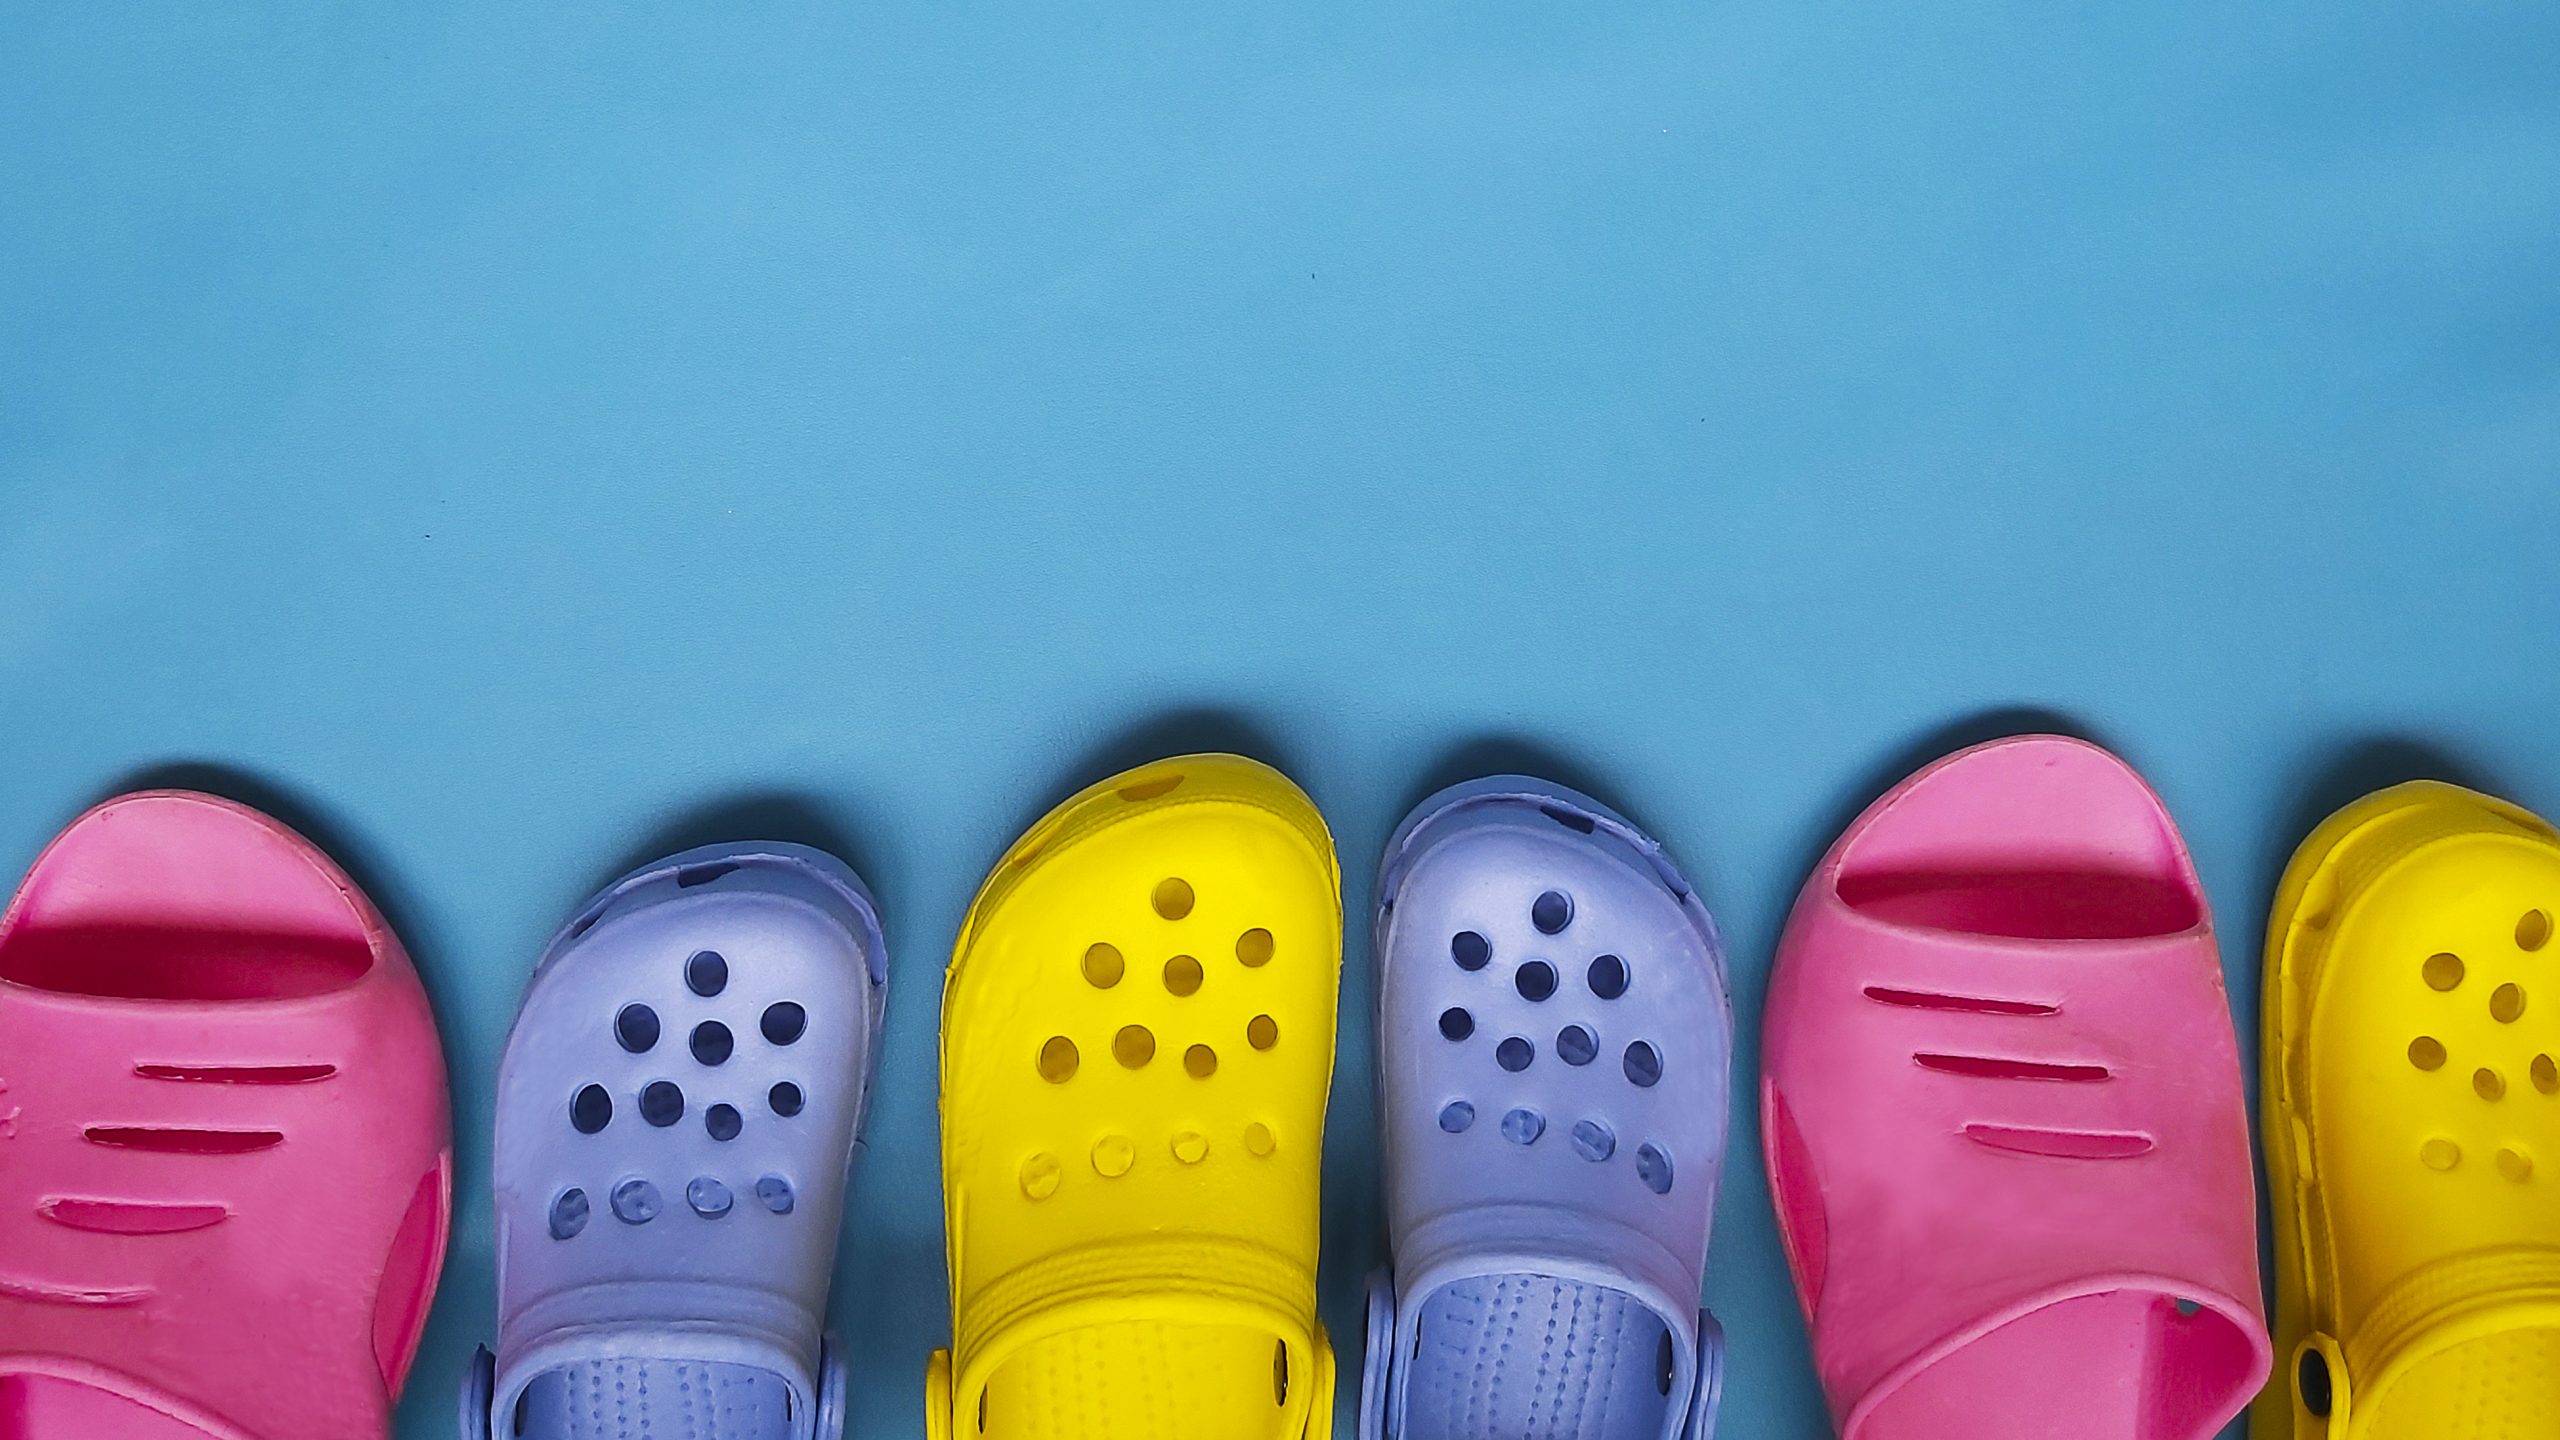 How Crocs Made Billions From Selling Ugly Shoes